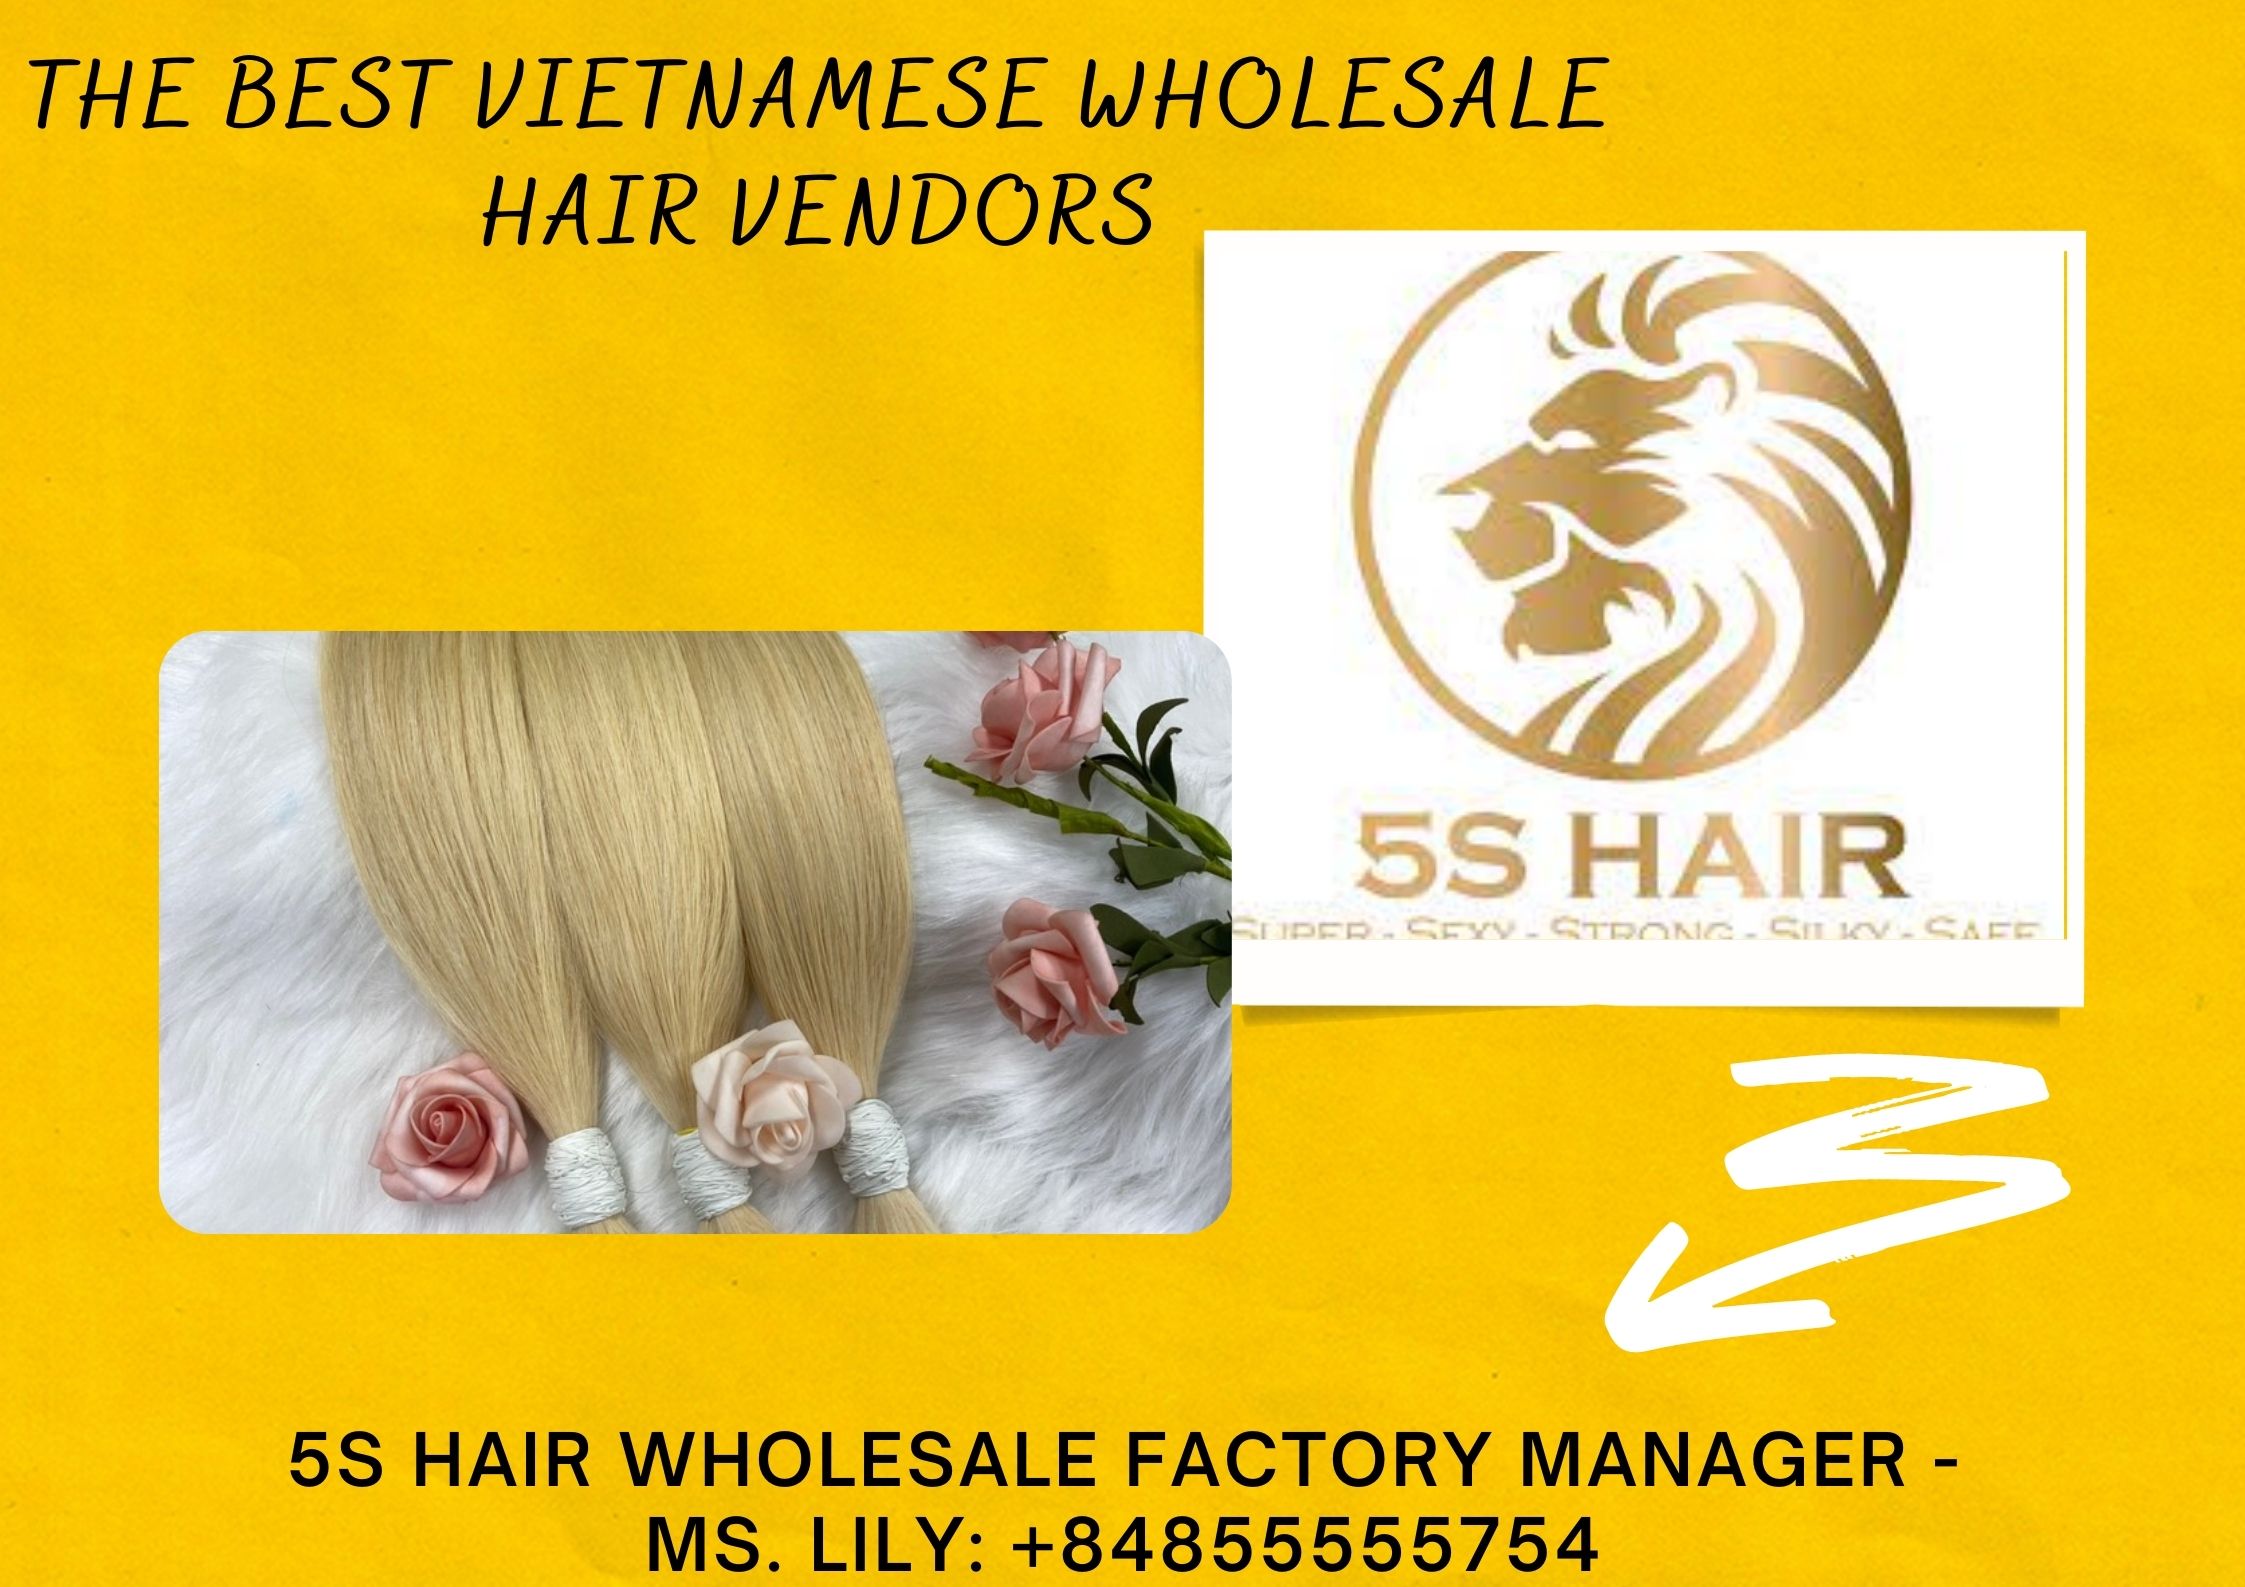 wholesale-hair-vendors-in-usa-the-lucrative-market-cannot-be-ignored10